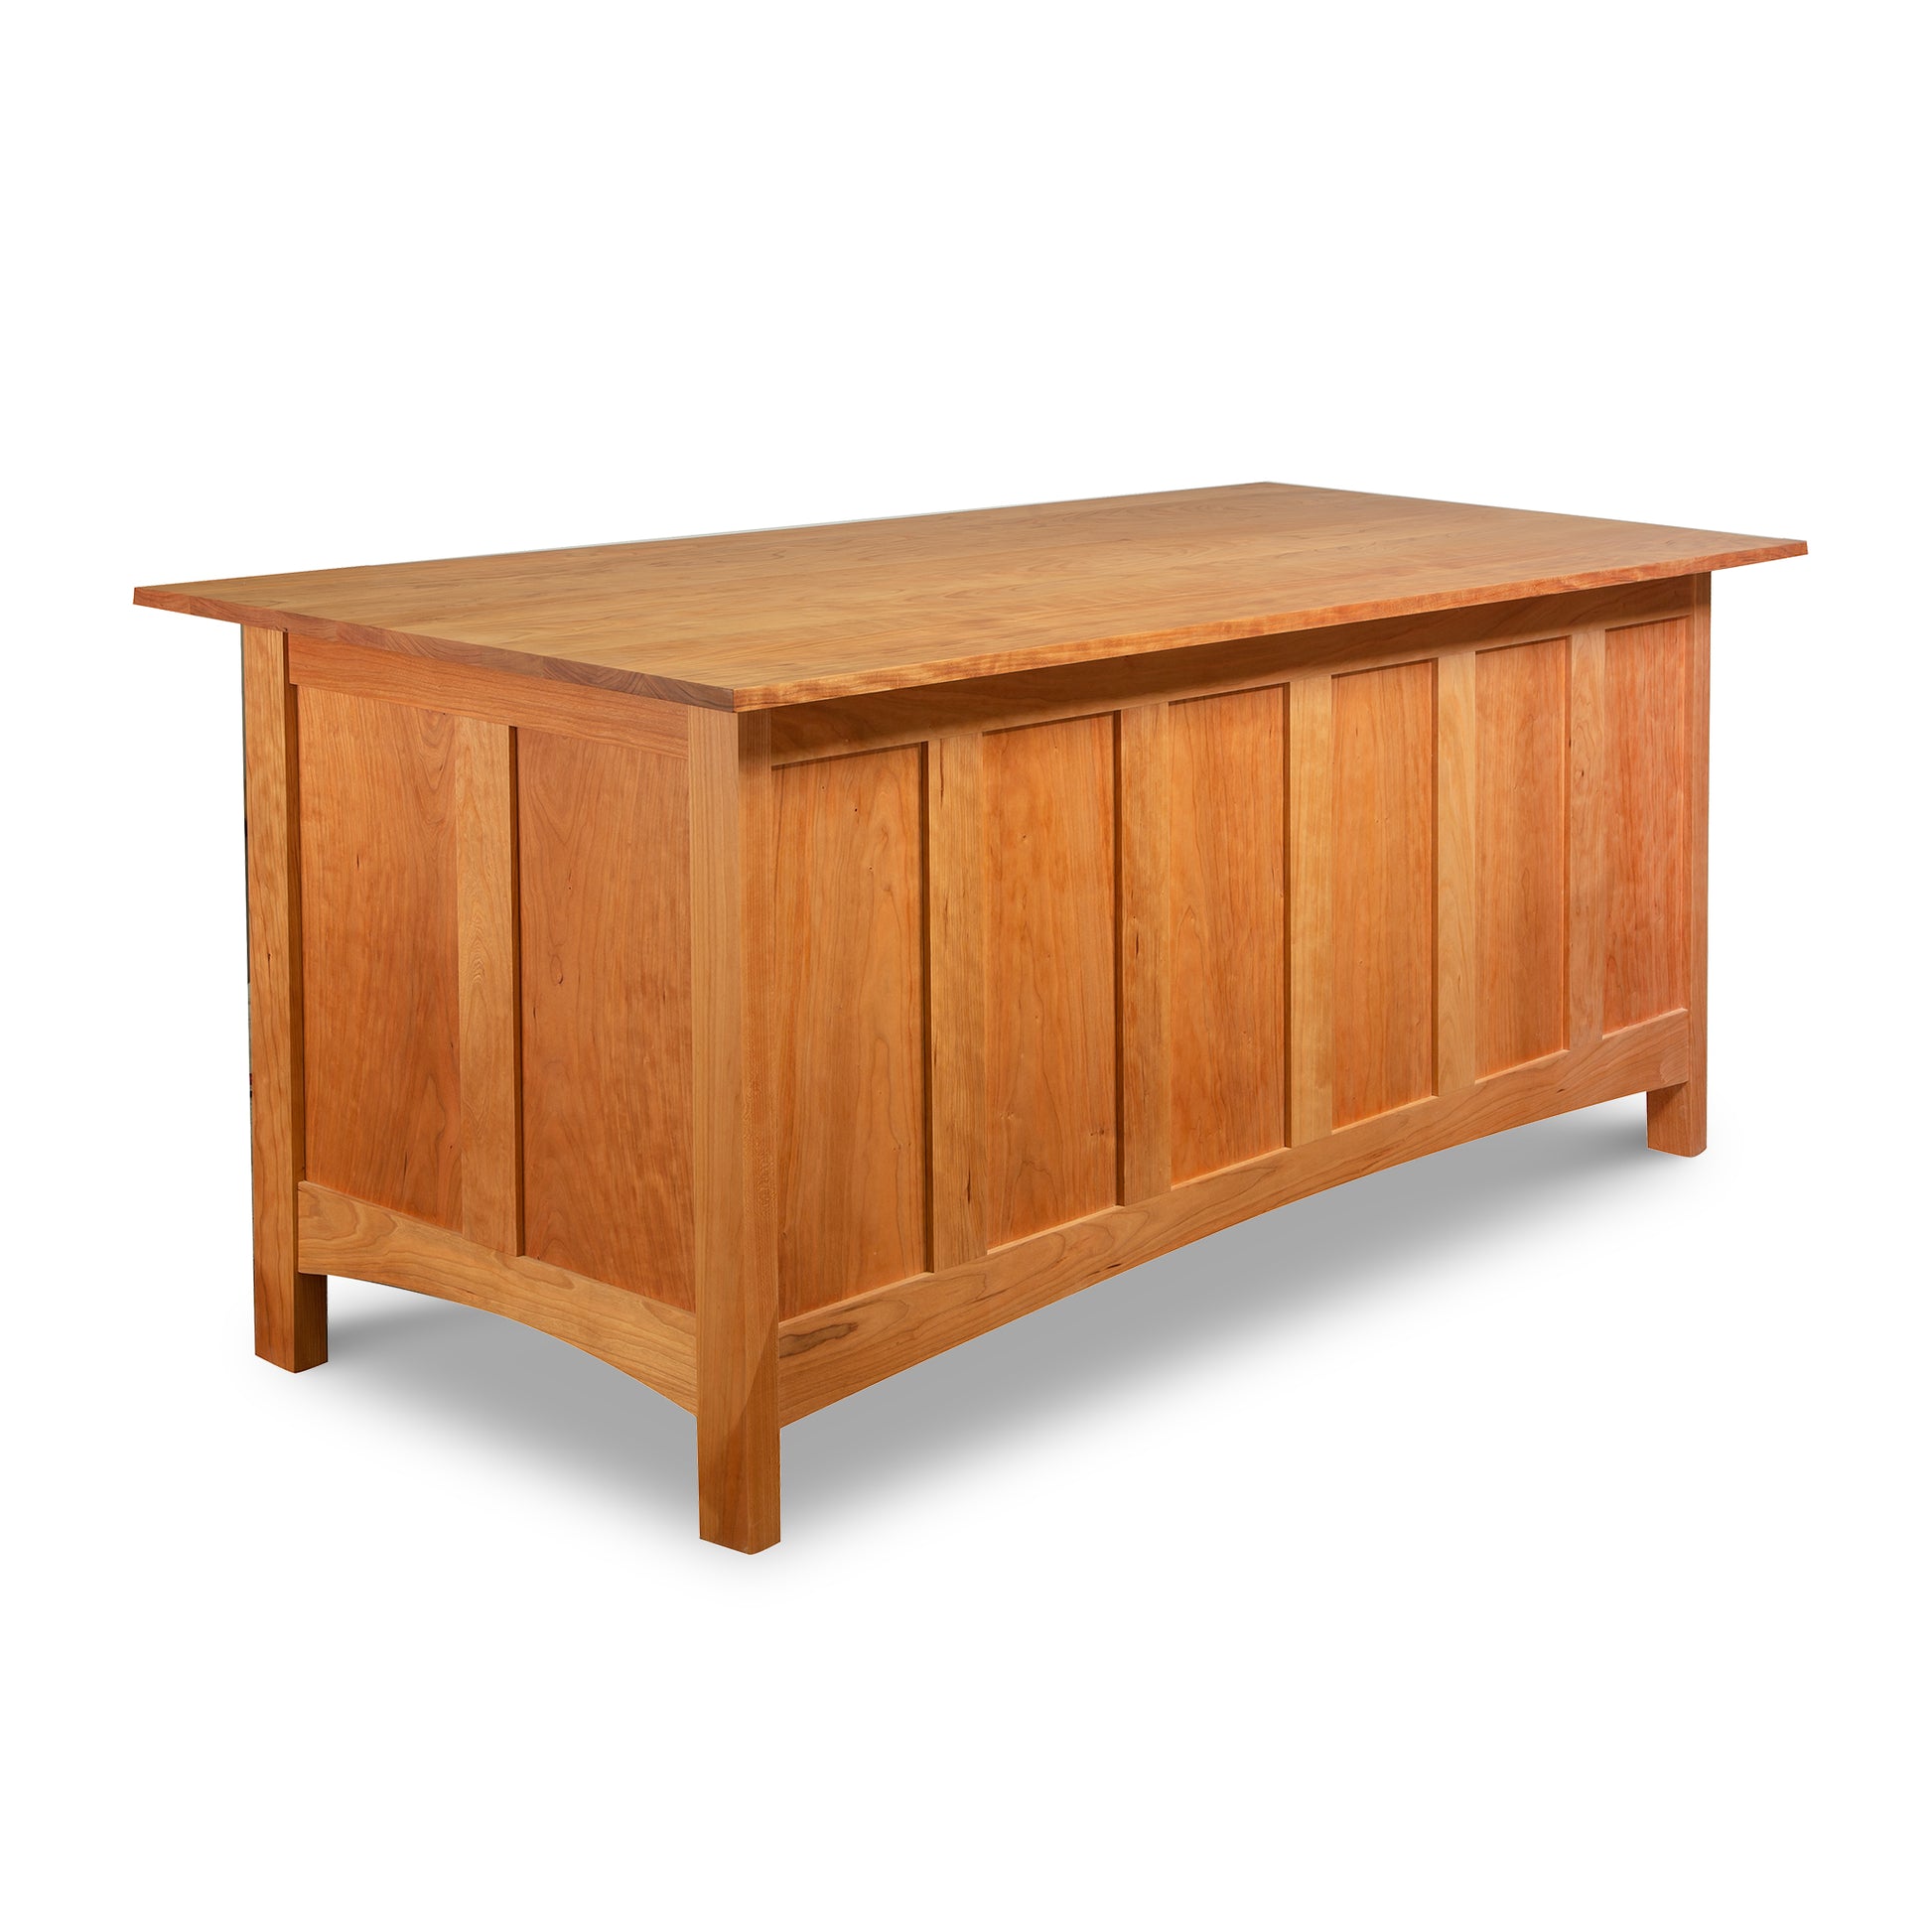 A Vermont Furniture Designs Burlington Shaker Executive Desk with panel sides on a white background.